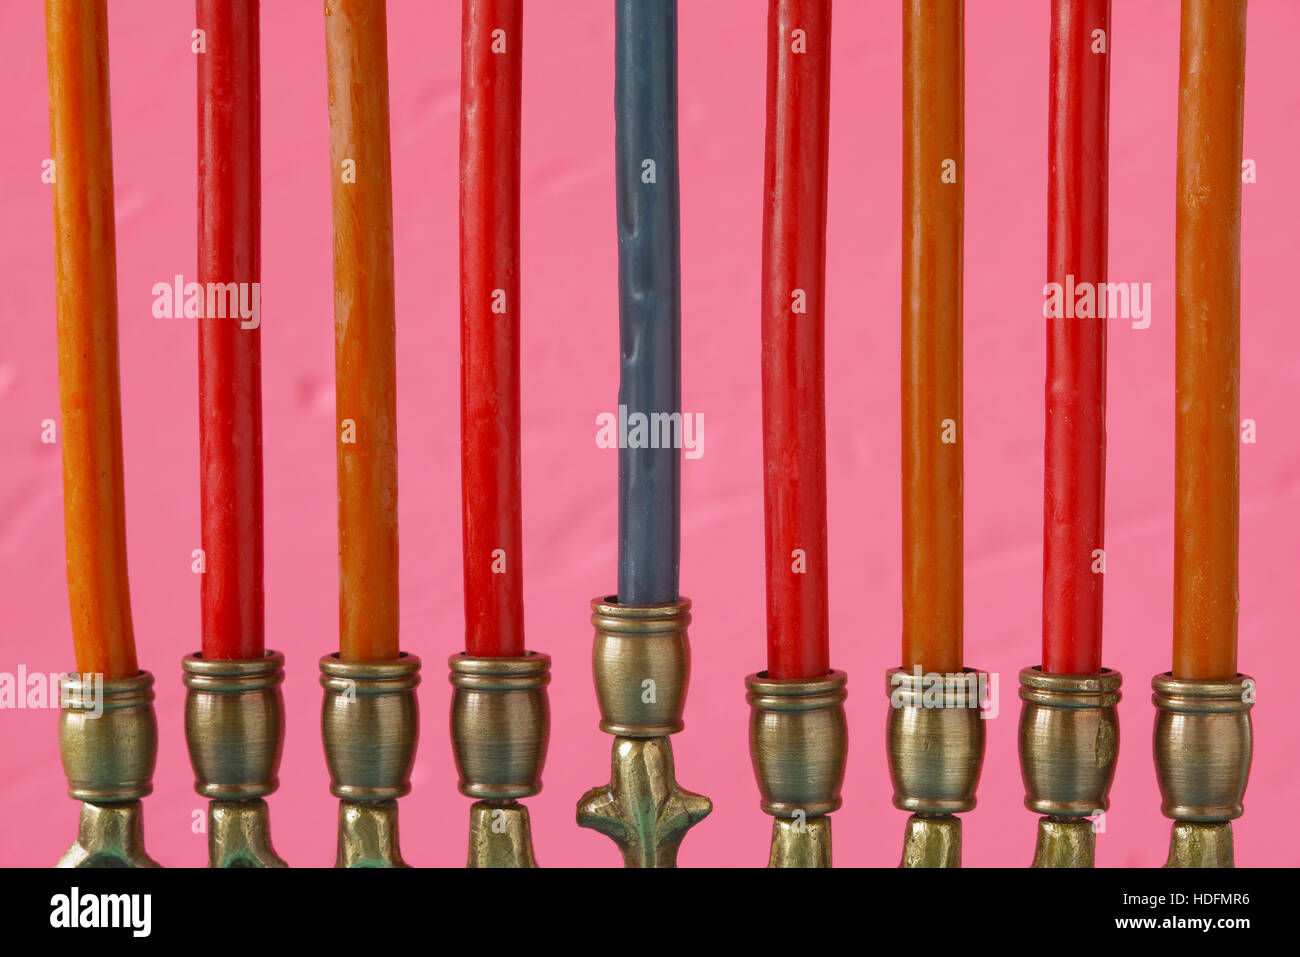 Hanukkah menorah with candles on the pink background Stock Photo